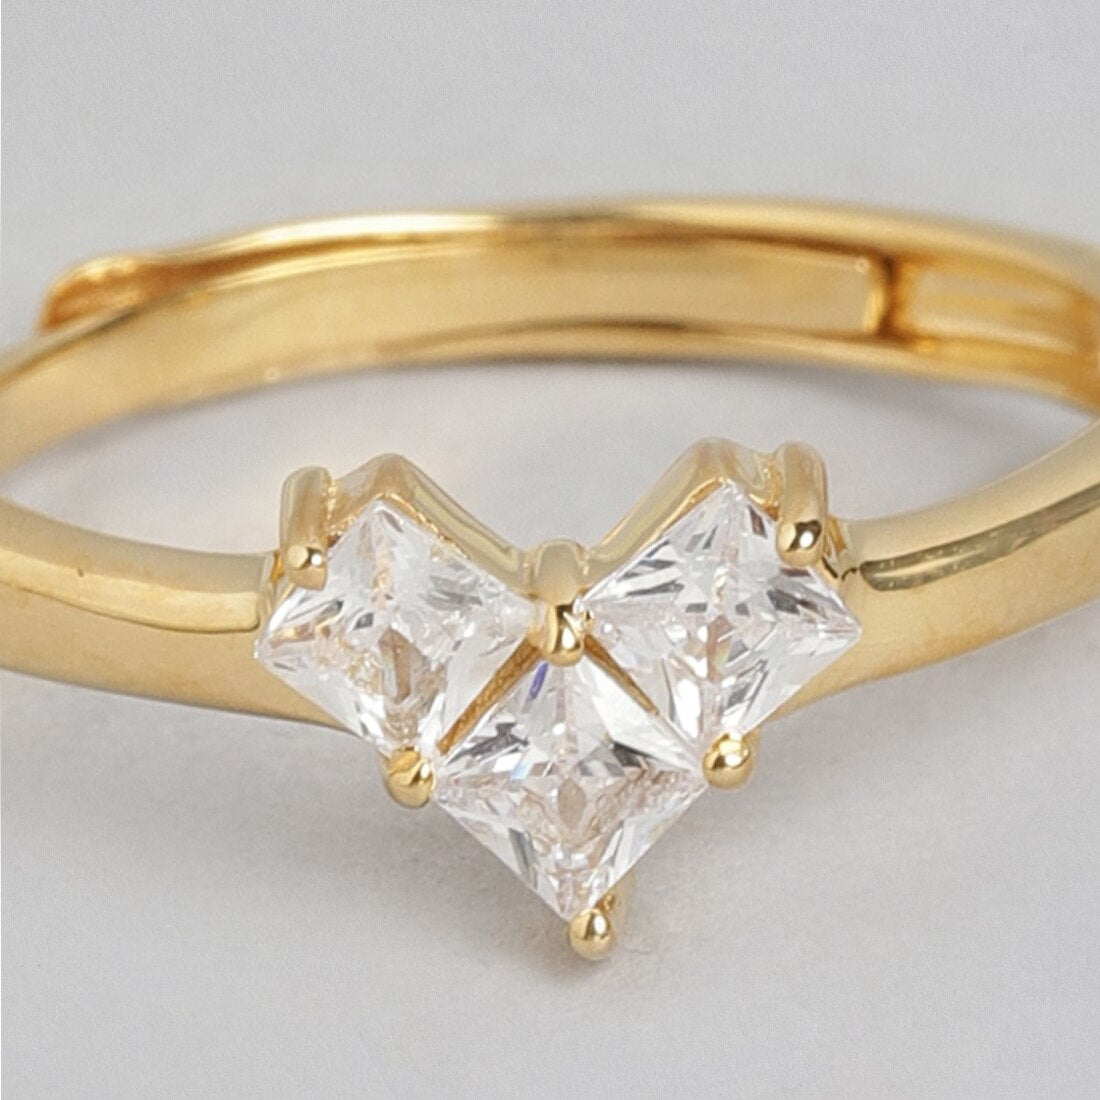 Golden Love Gold-Plated 925 Sterling Silver Ring with White Cubic Zirconia